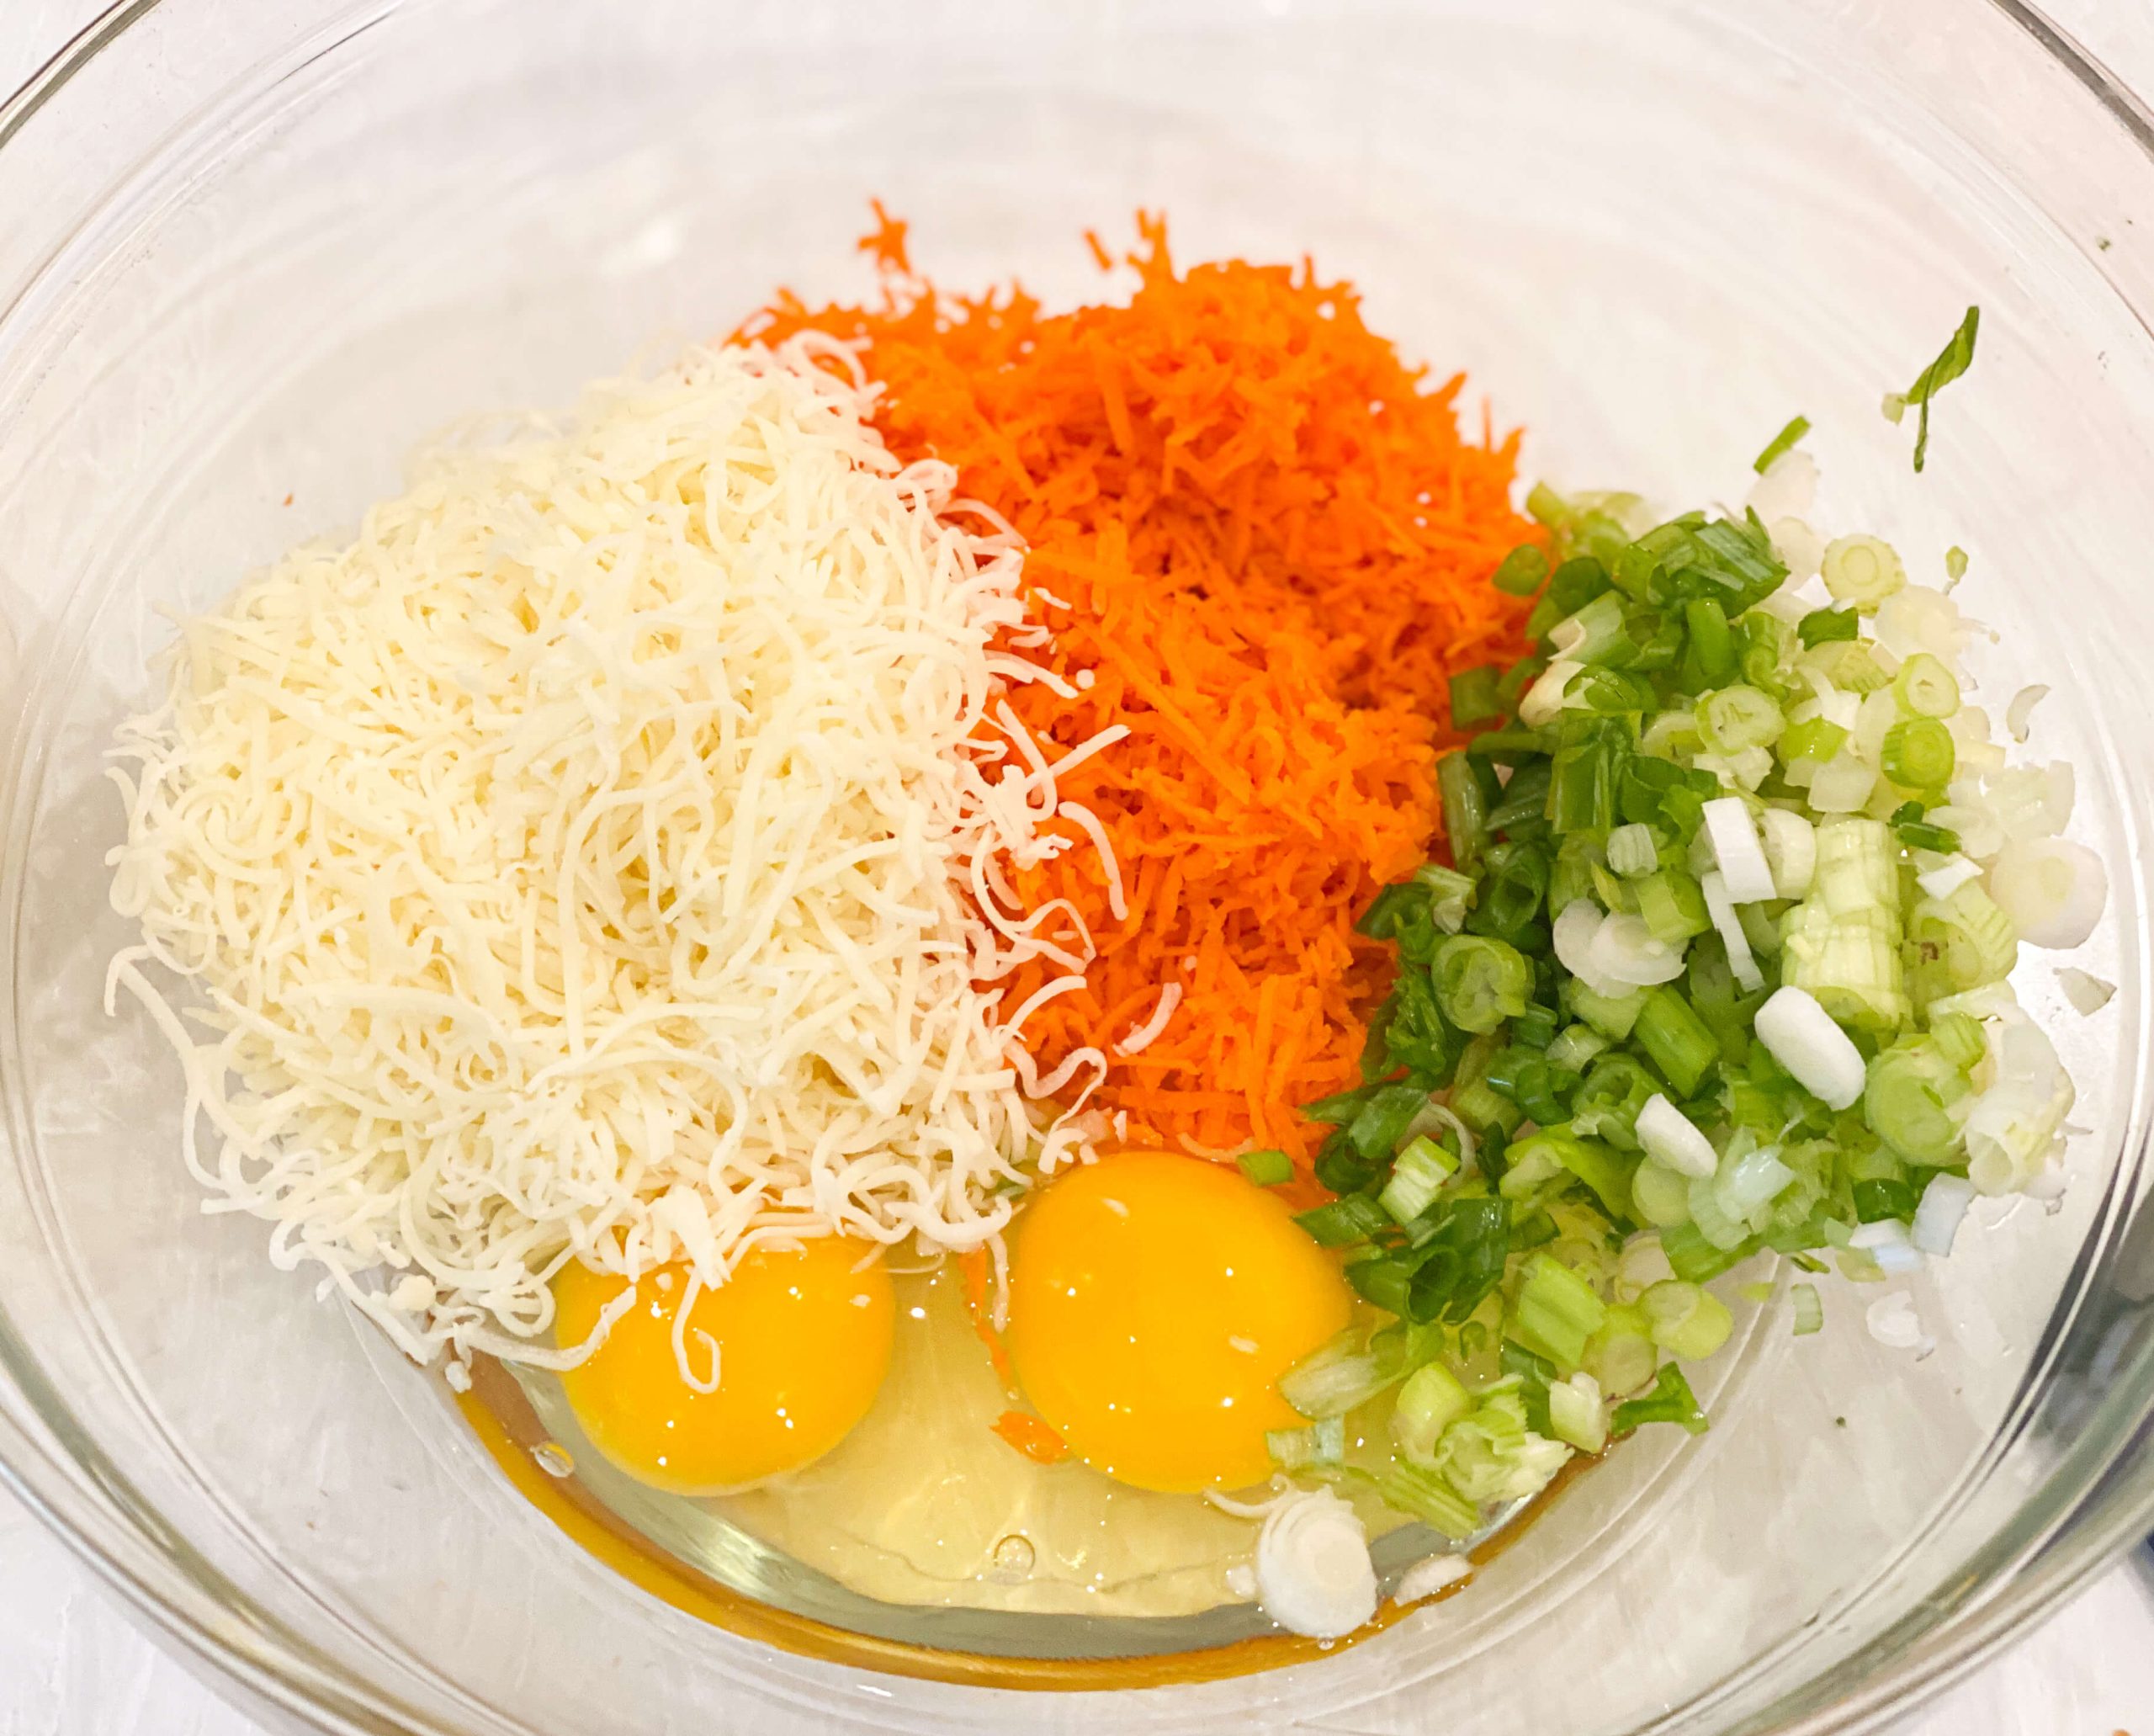 cheese, scallions, shredded carrots, and eggs in a bowl 